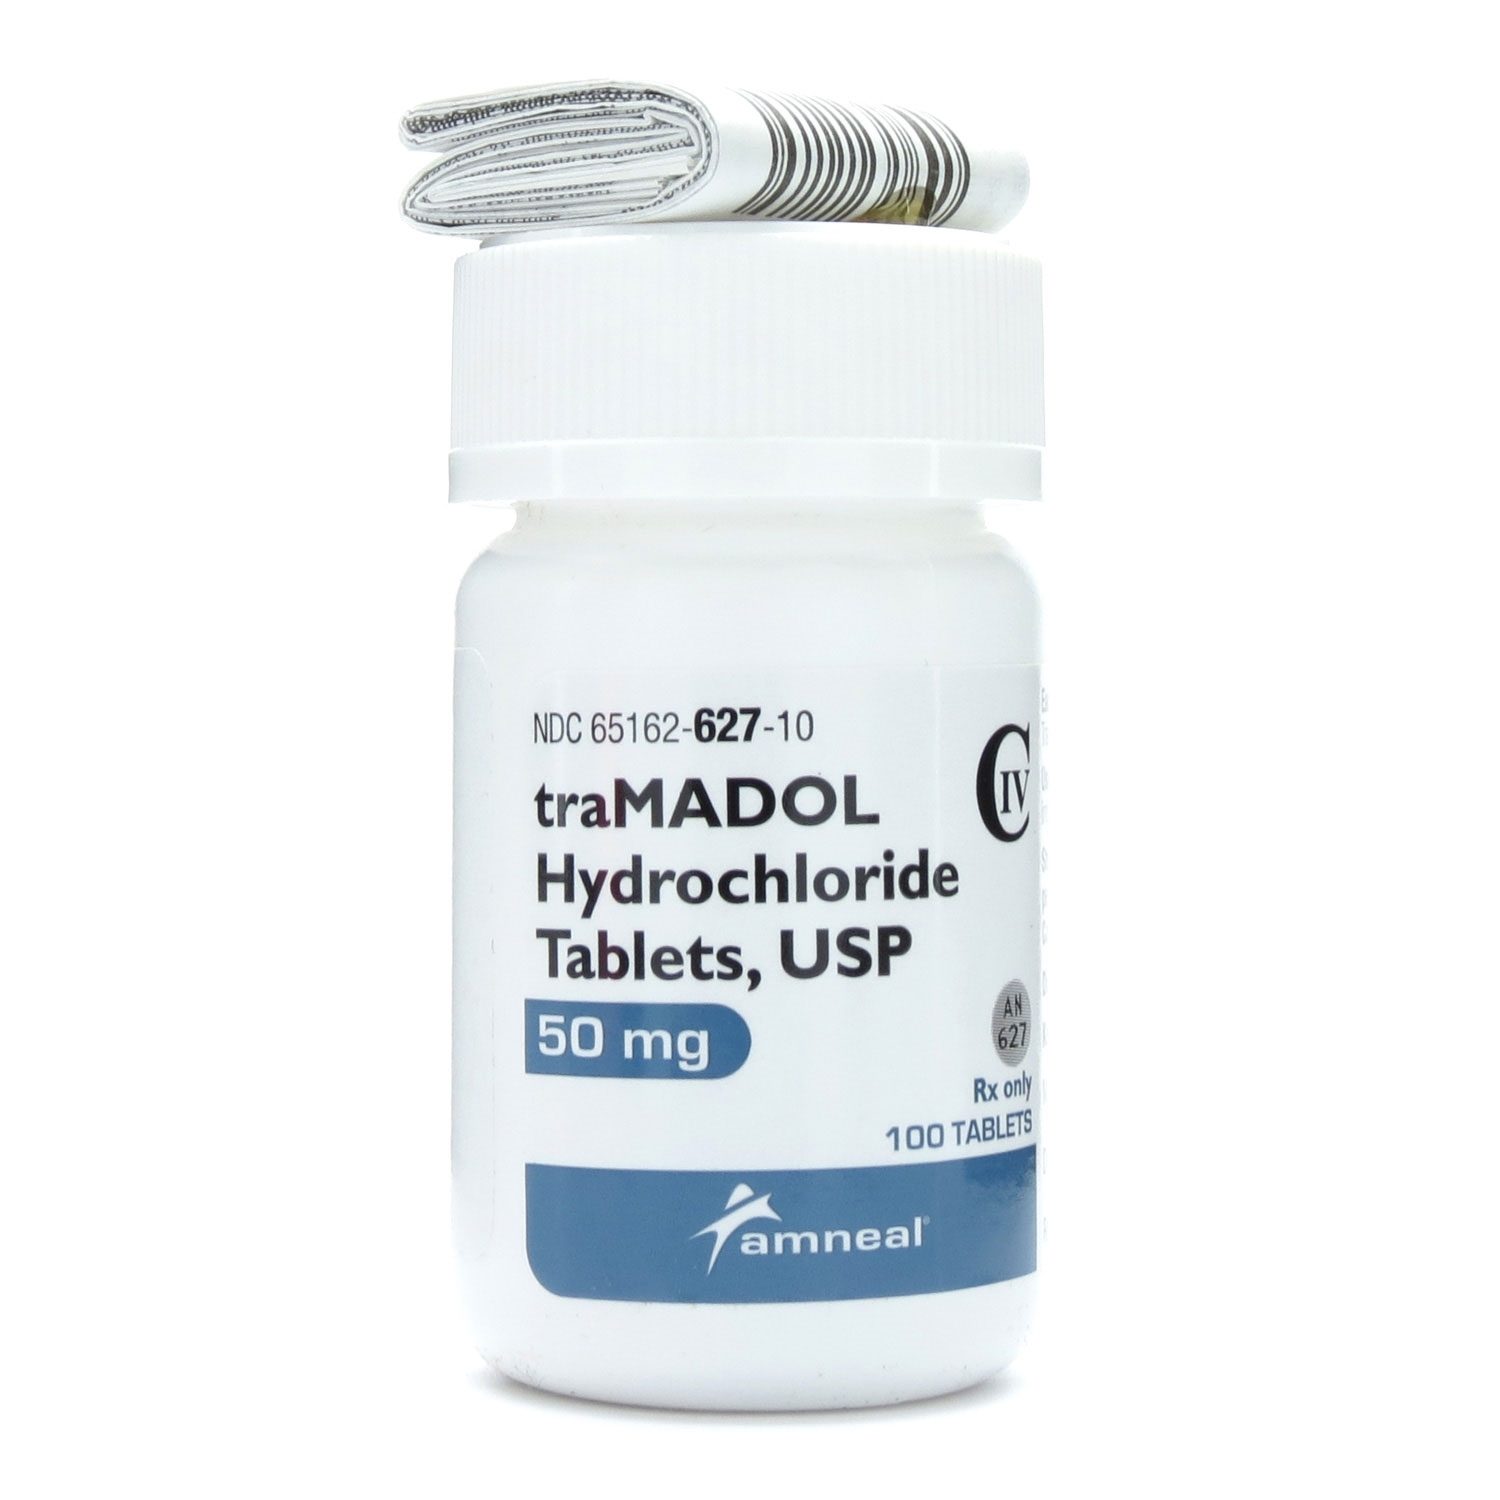 tramadol hcl 50 mg tablet dosage